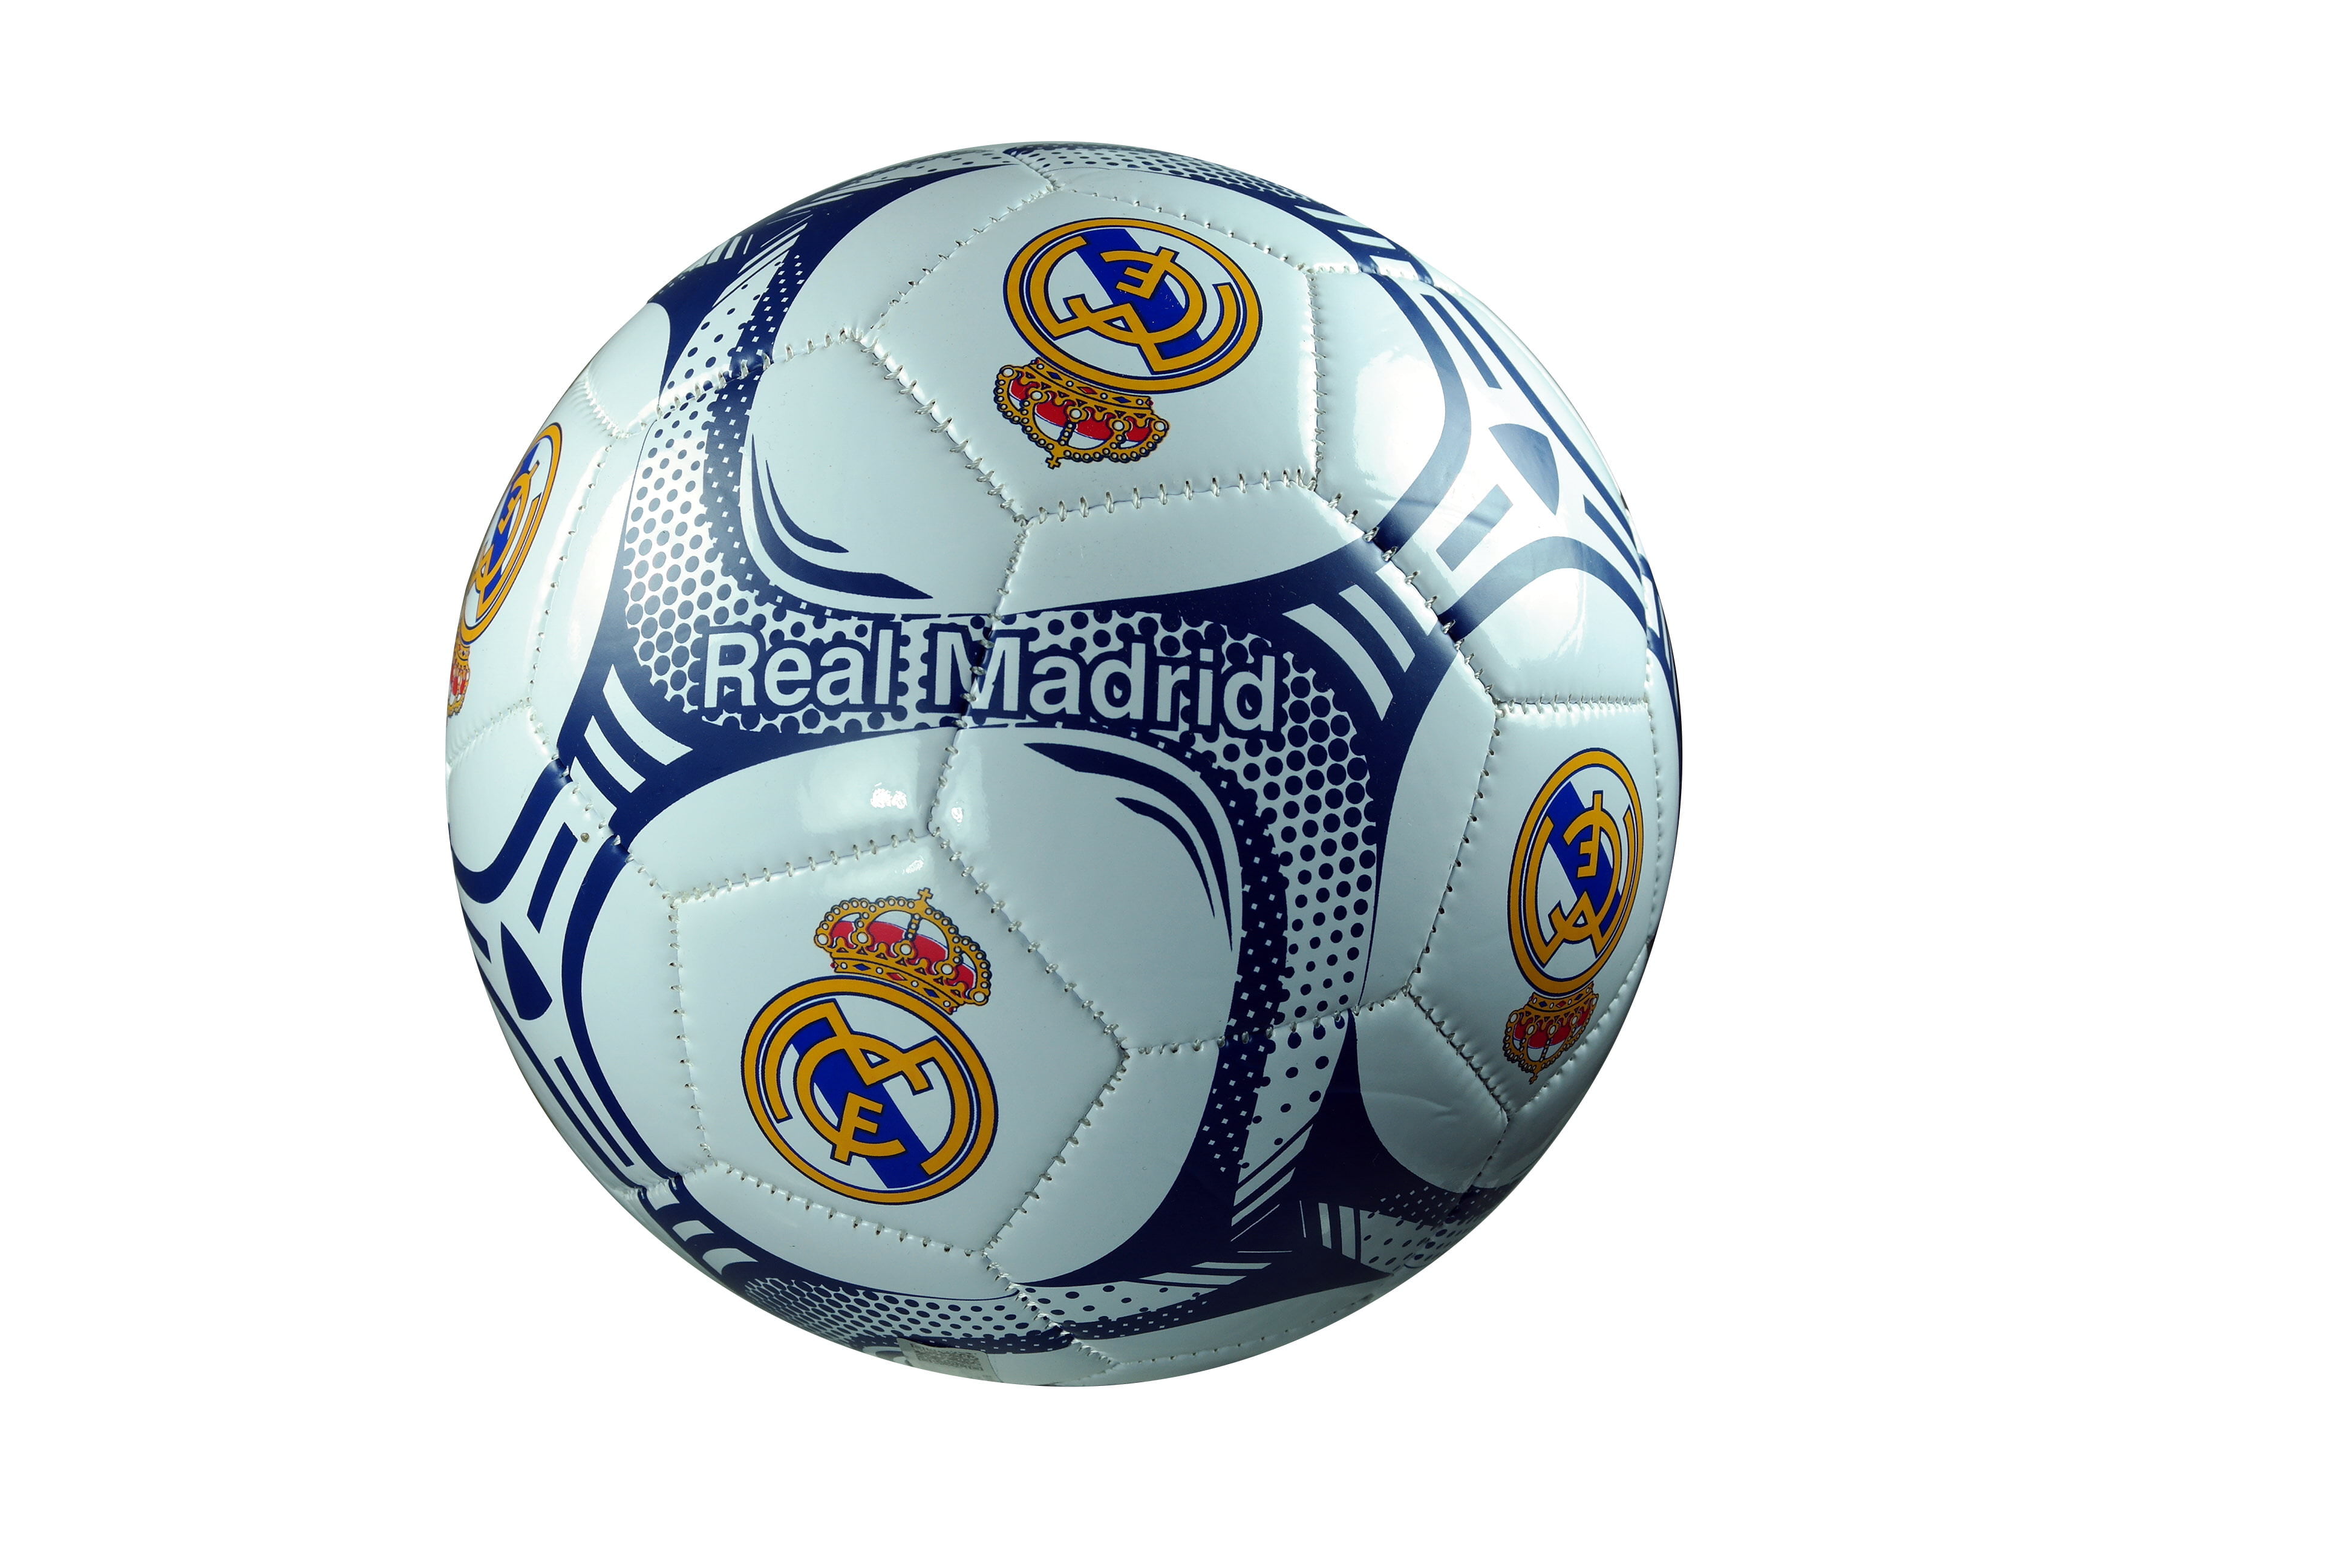 Real Madrid C.F. Authentic Official Licensed Soccer Ball Size 5 -03-1